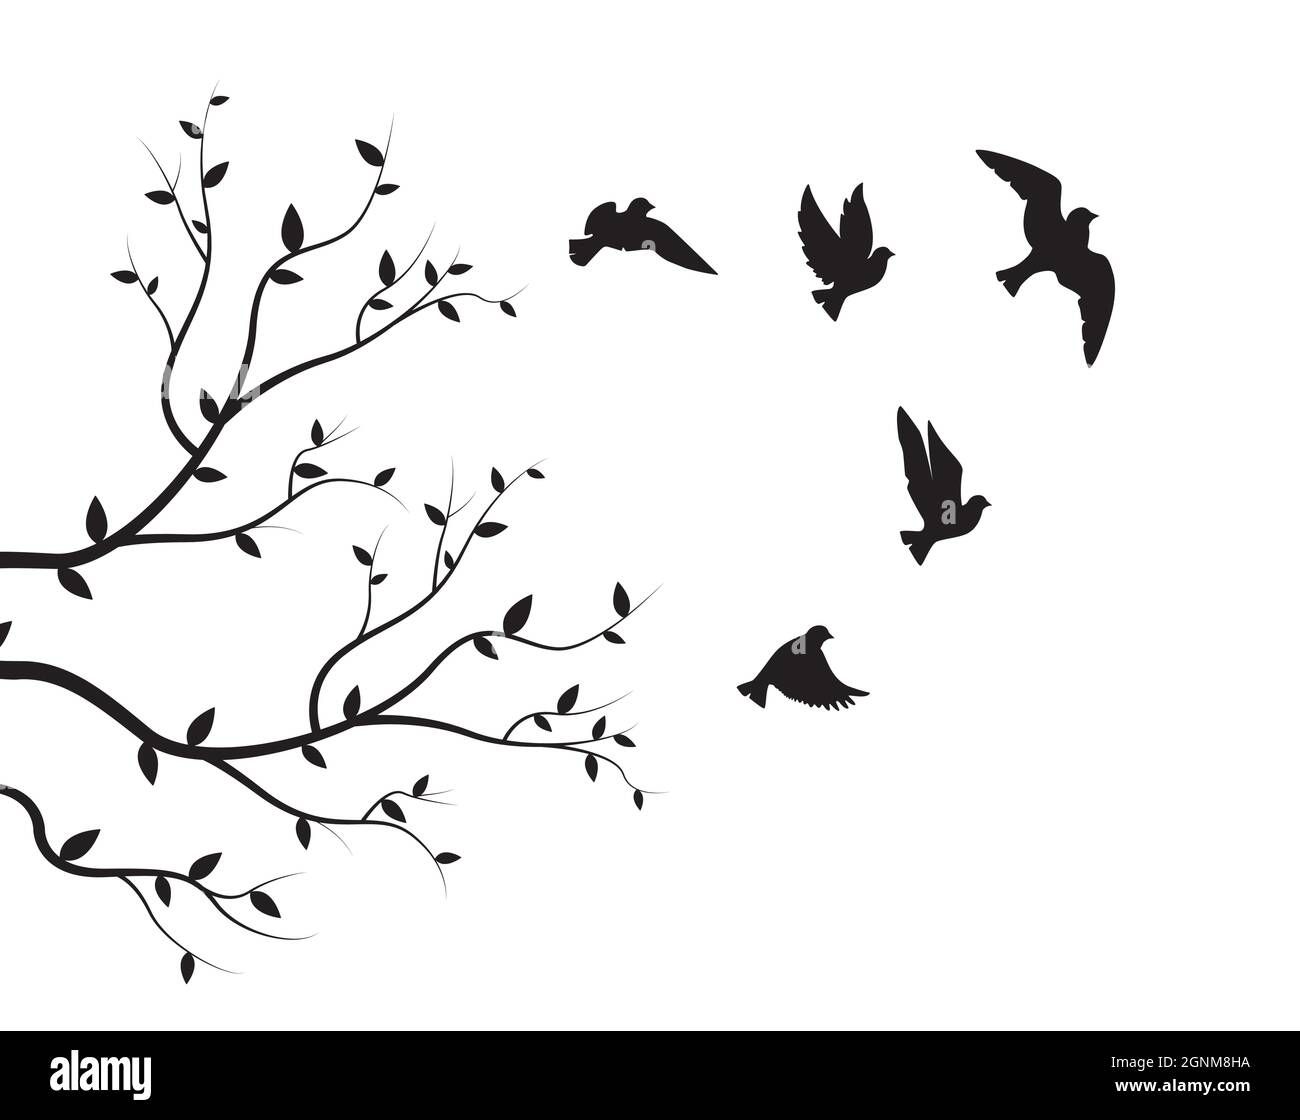 Flying Birds Silhouettes And Branch Illustration Isolated On White  Background, Vector. Natural Wall Decals, Wall Art, Artwork (View 2 of 15)